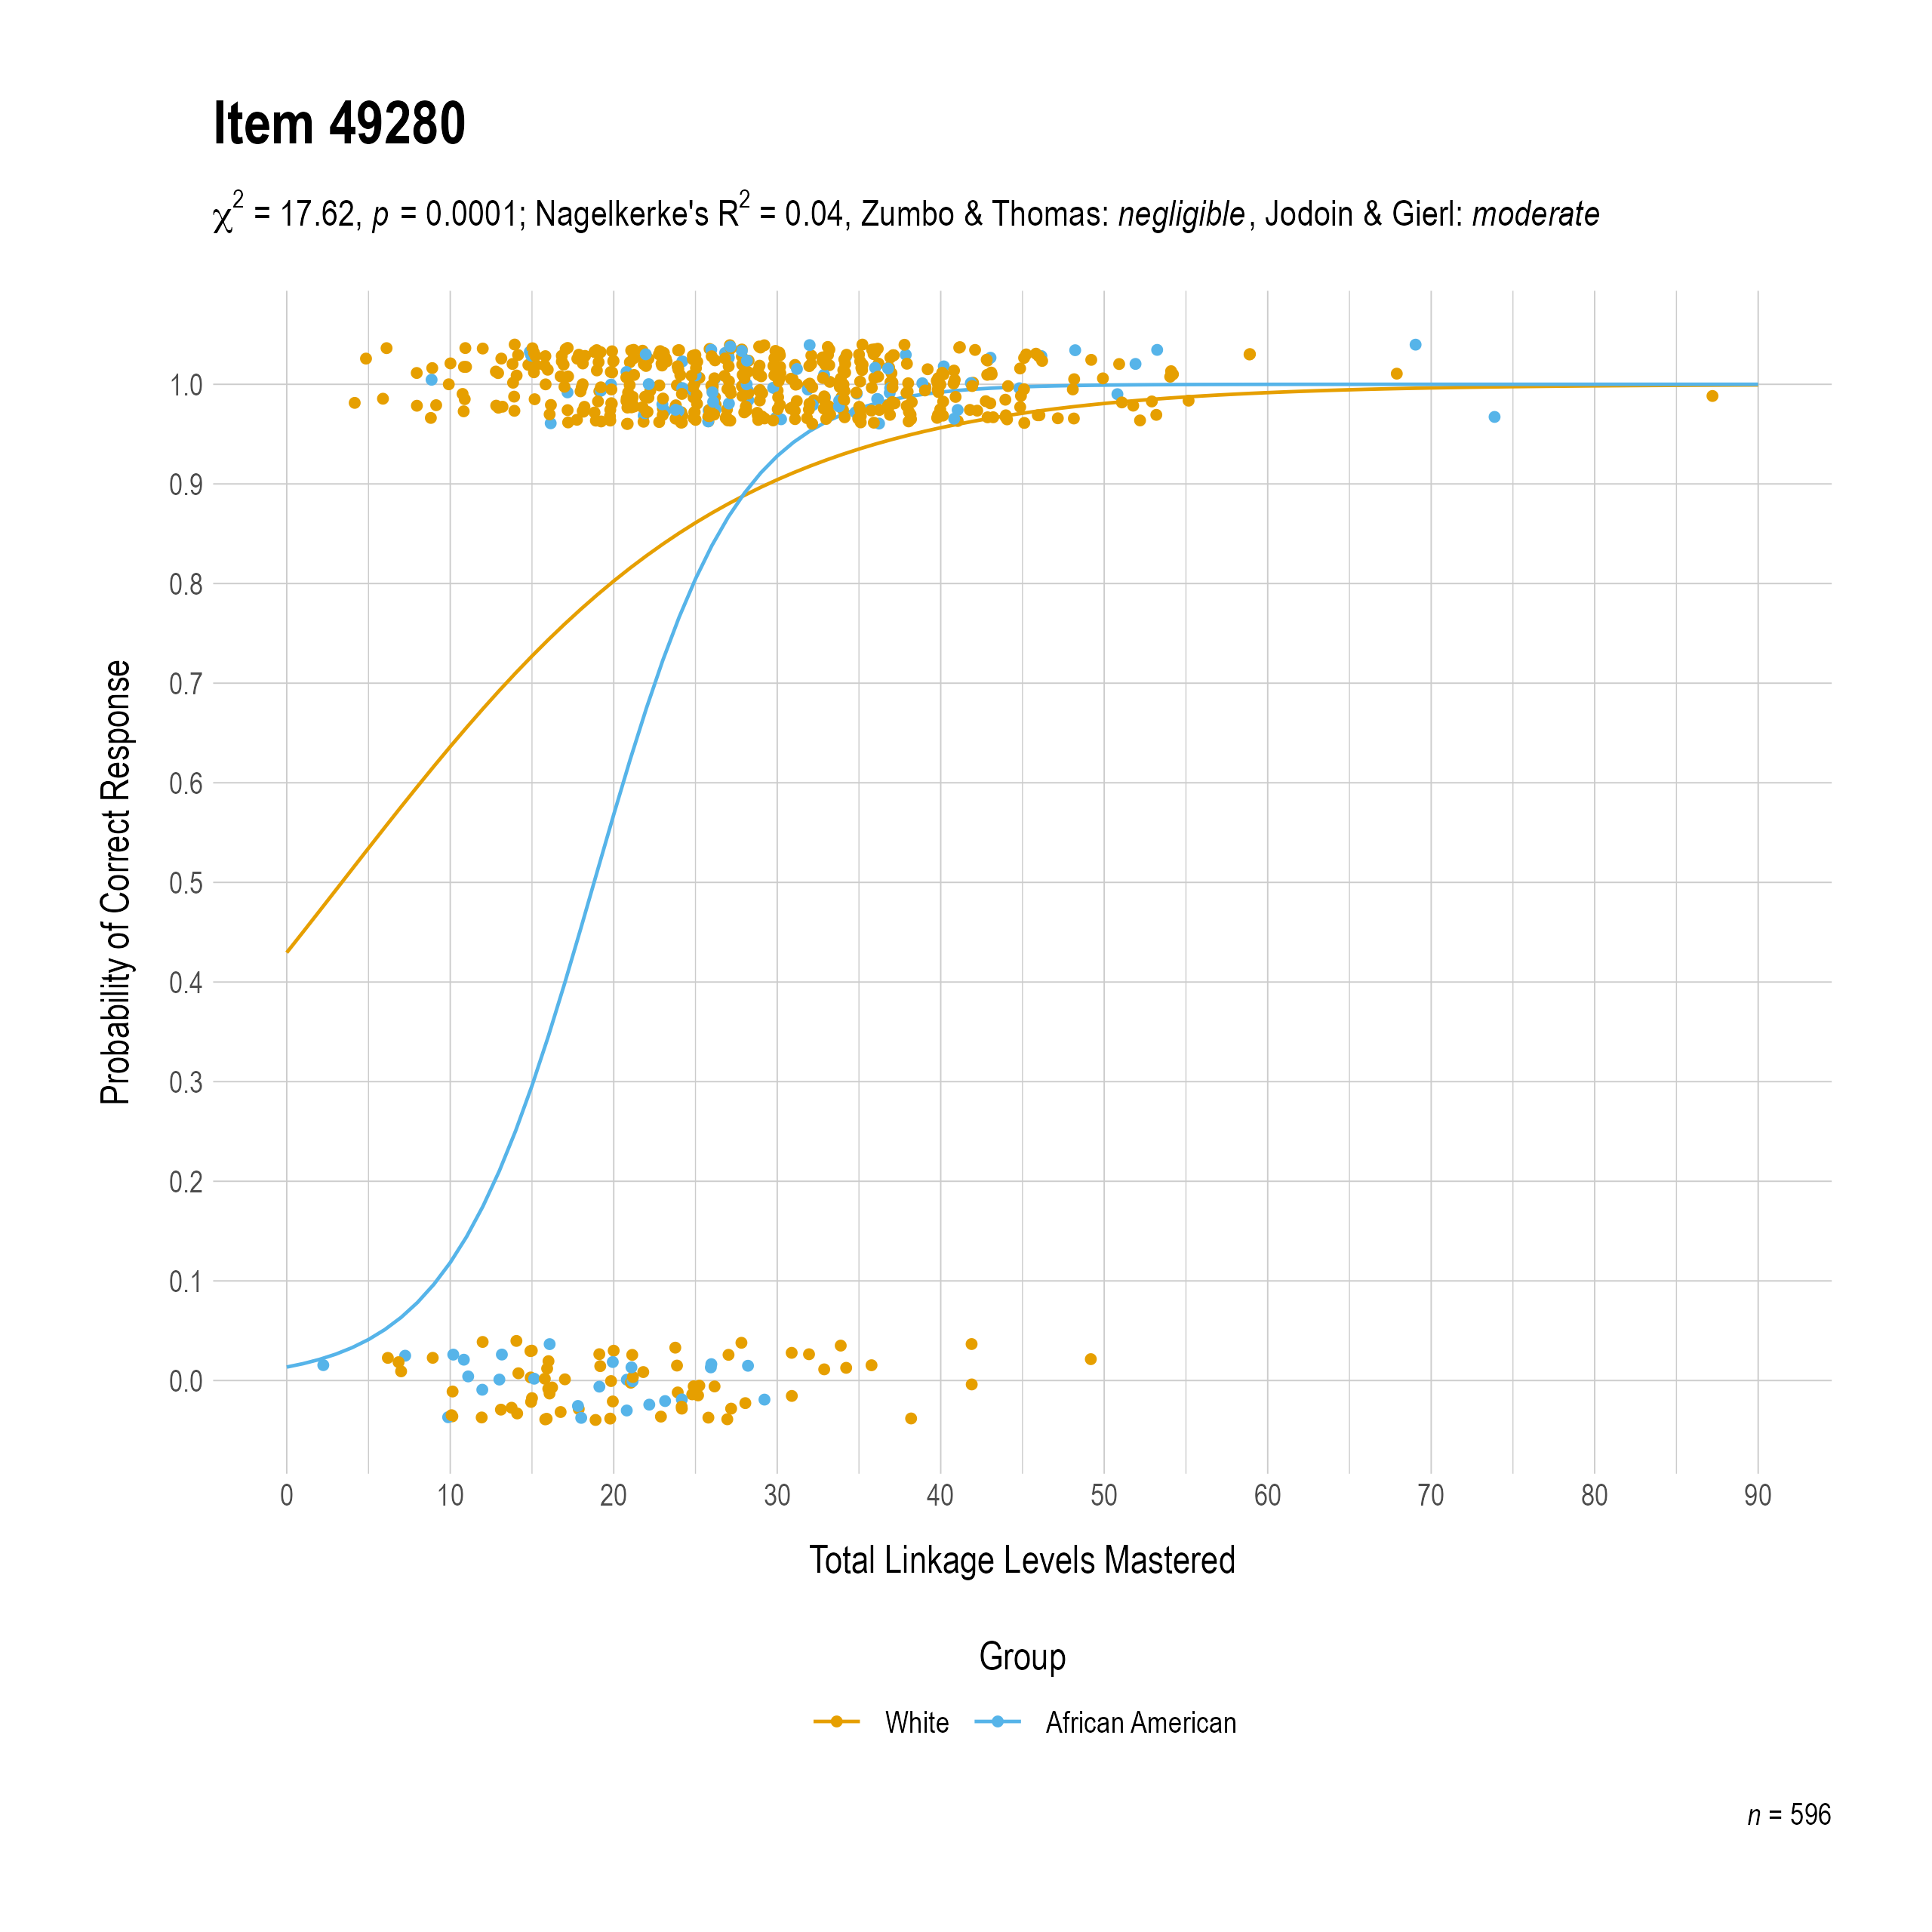 The plot of the combined race differential item function evidence for English language arts item 49280. The figure contains points shaded by group. The figure also contains a logistic regression curve for each group. The total linkage levels mastered in is on the x-axis, and the probability of a correct response is on the y-axis.